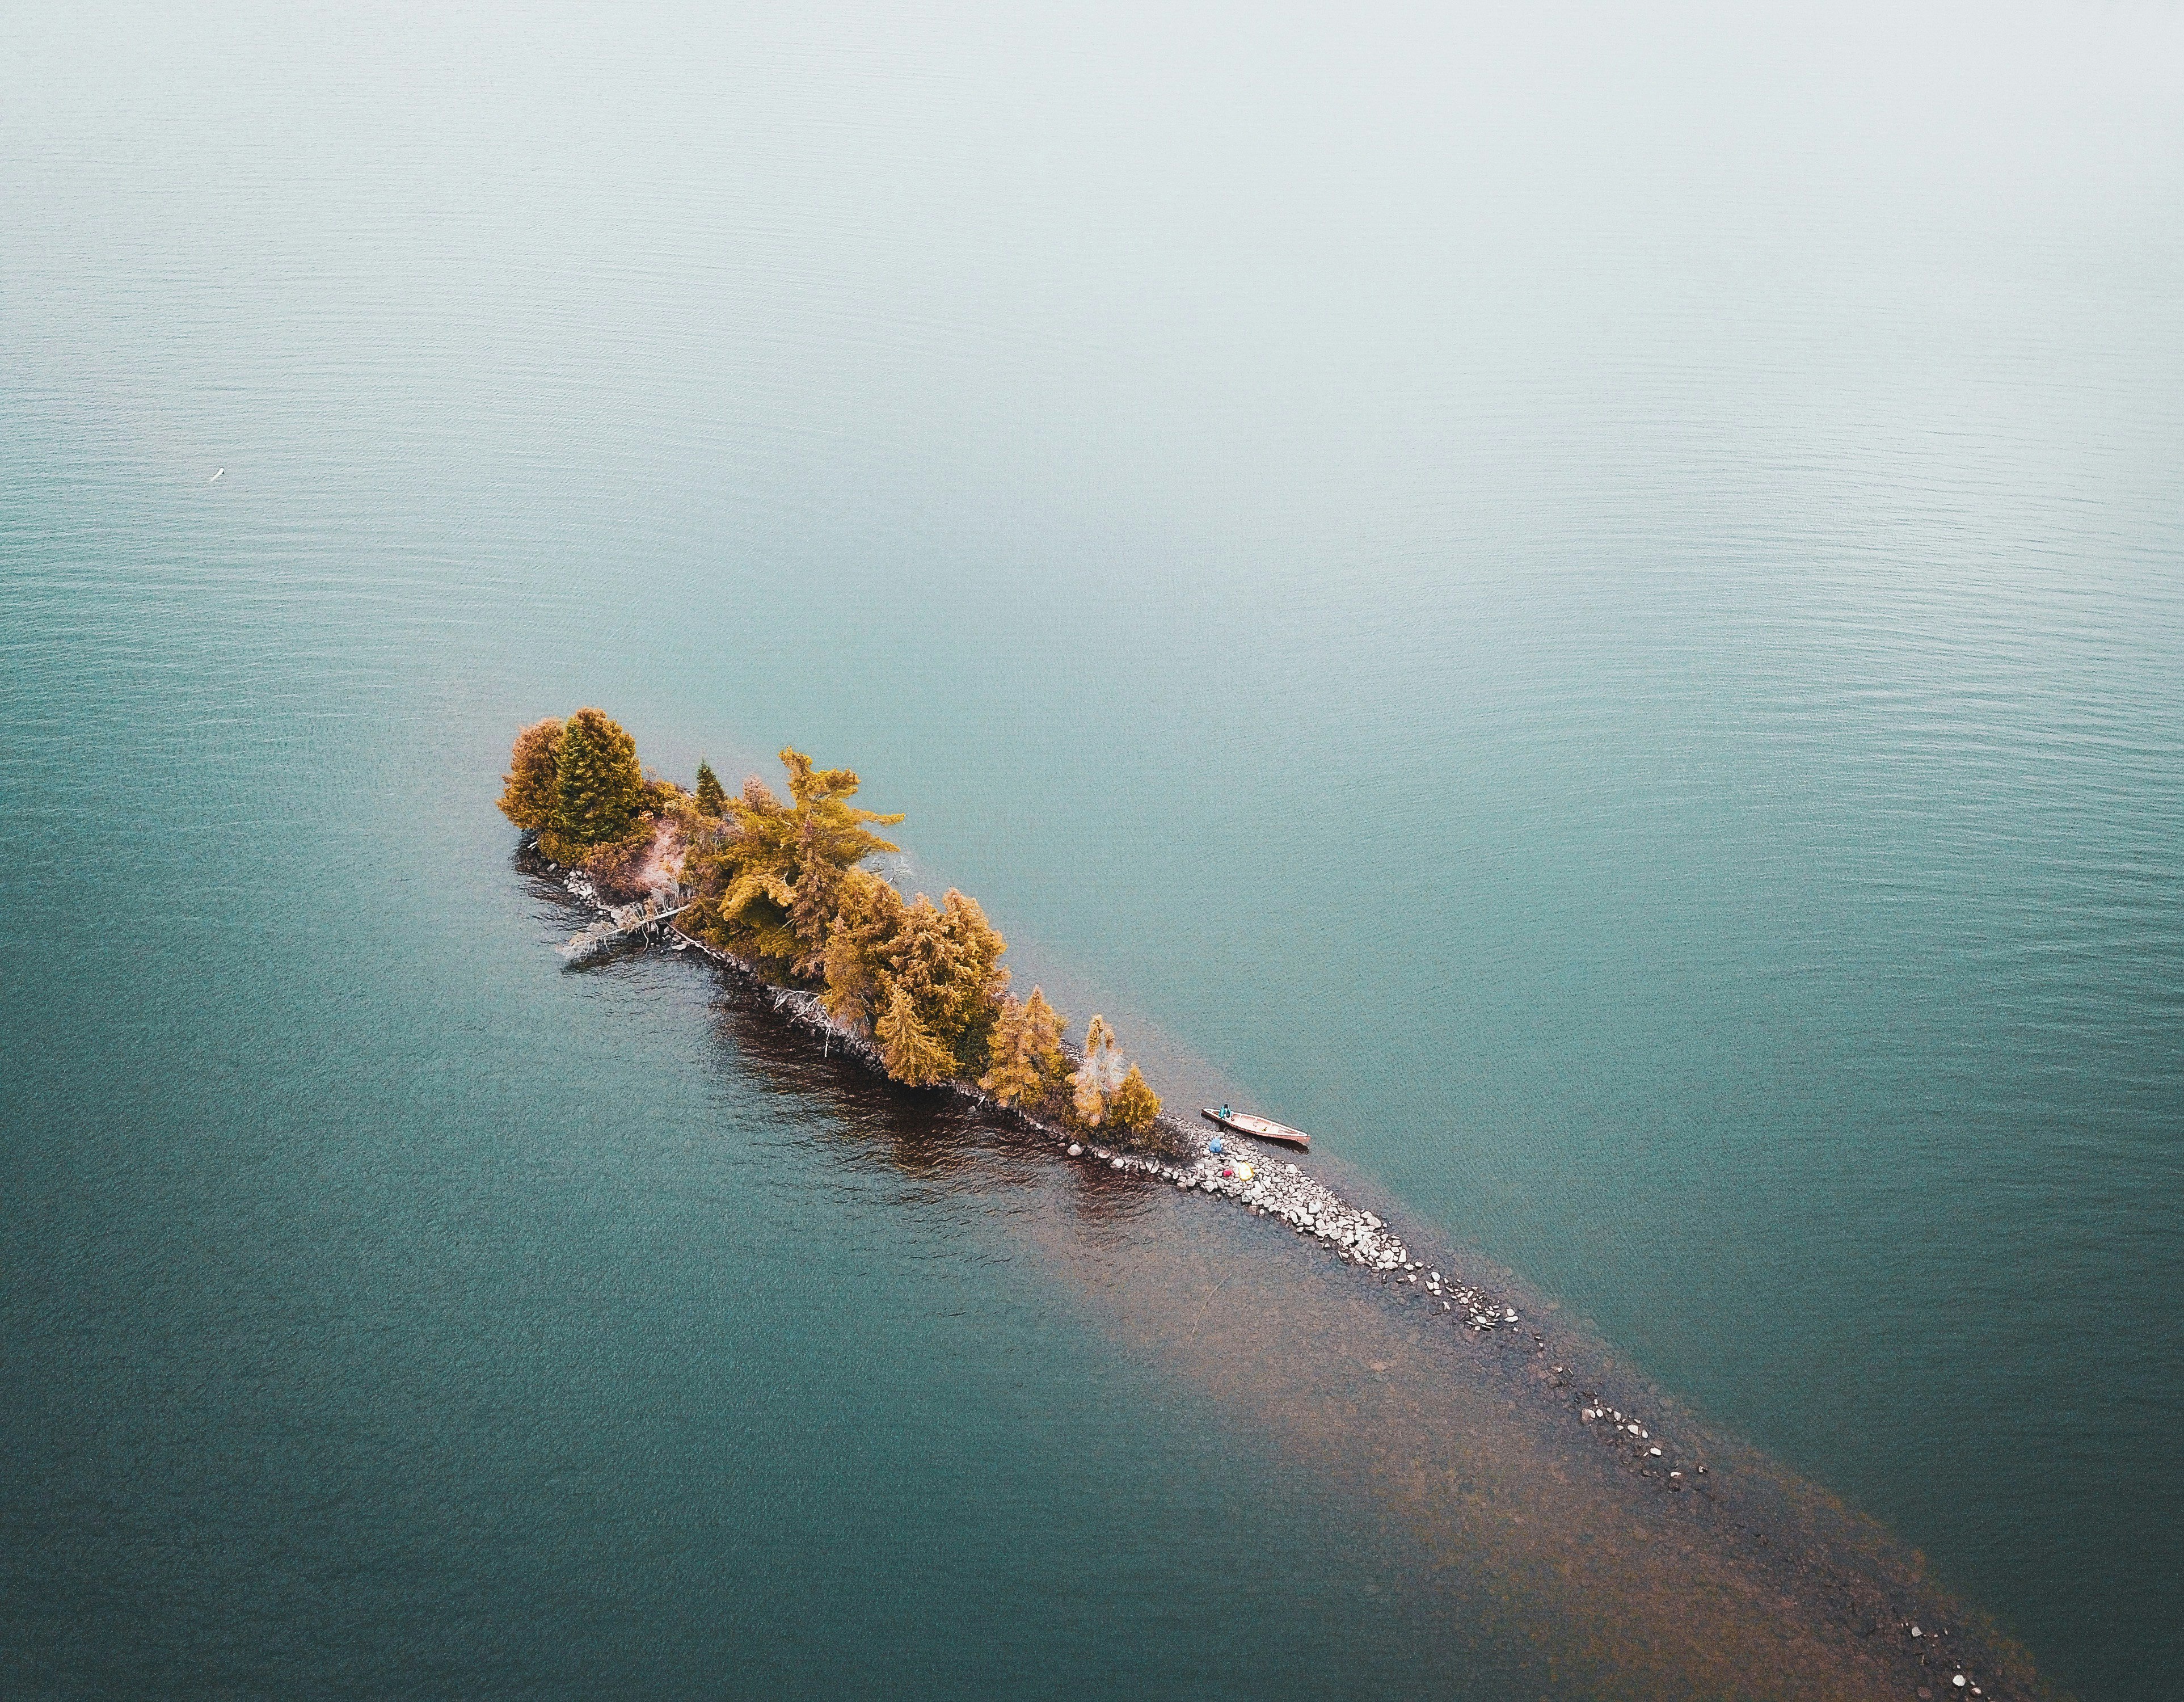 green trees on island surrounded by water during daytime